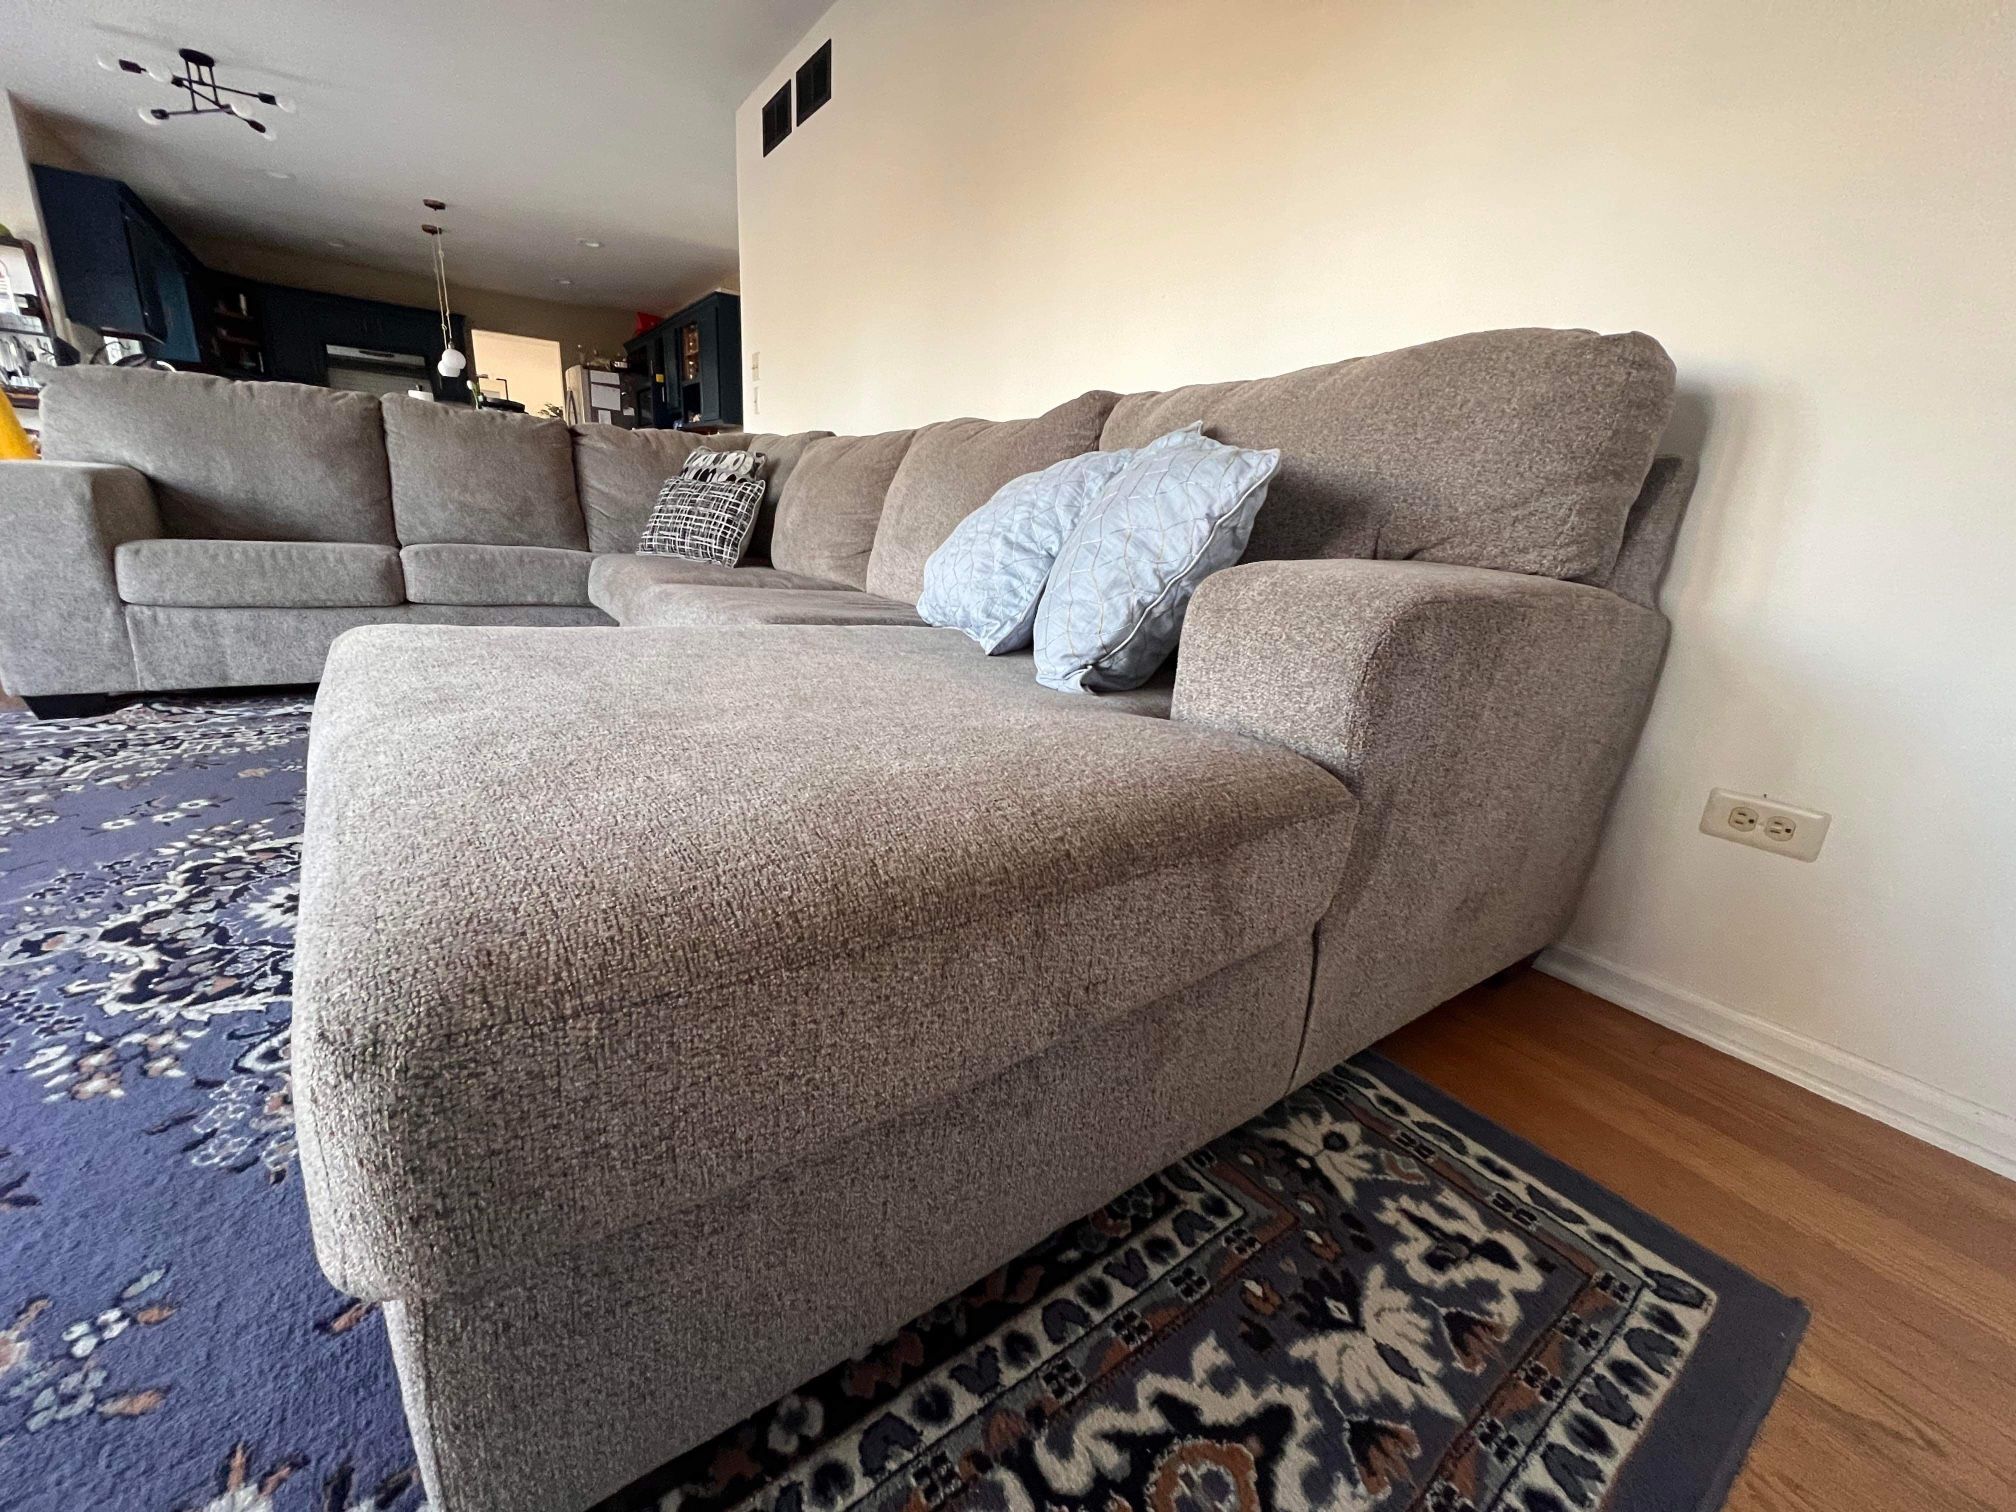 Big Gray Fabric Sectional Sofa Couch